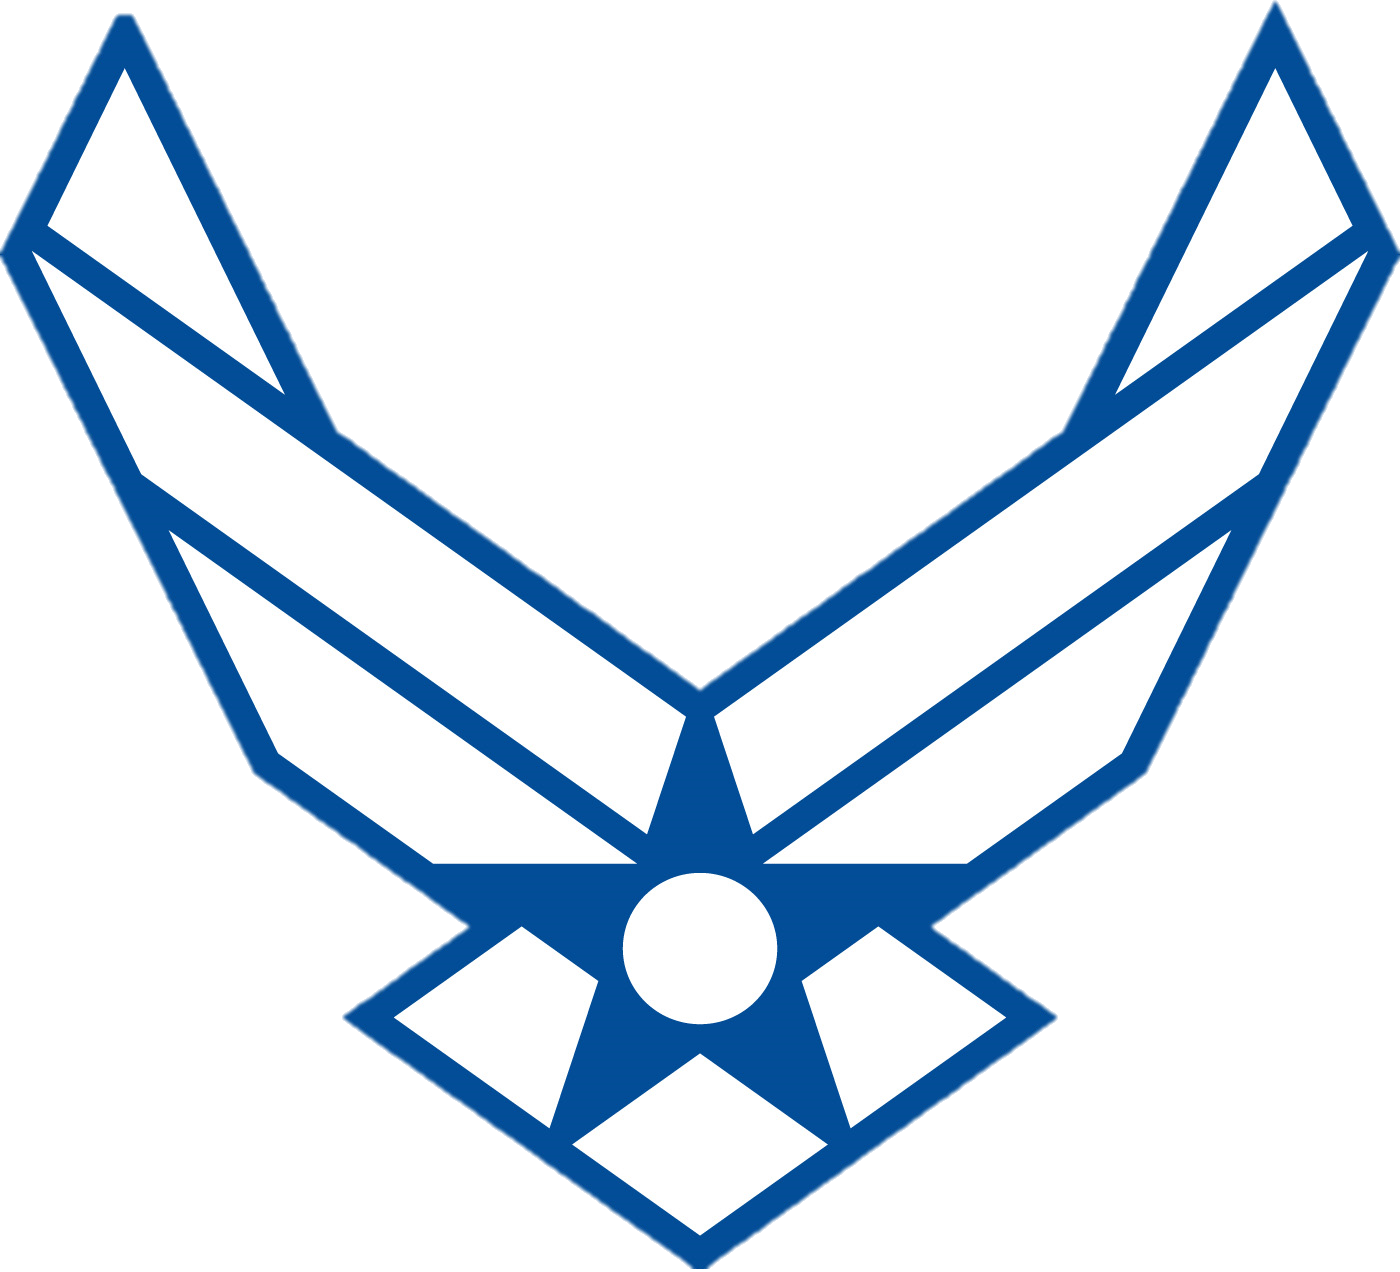 Blue and white wings outline with a star in the center.